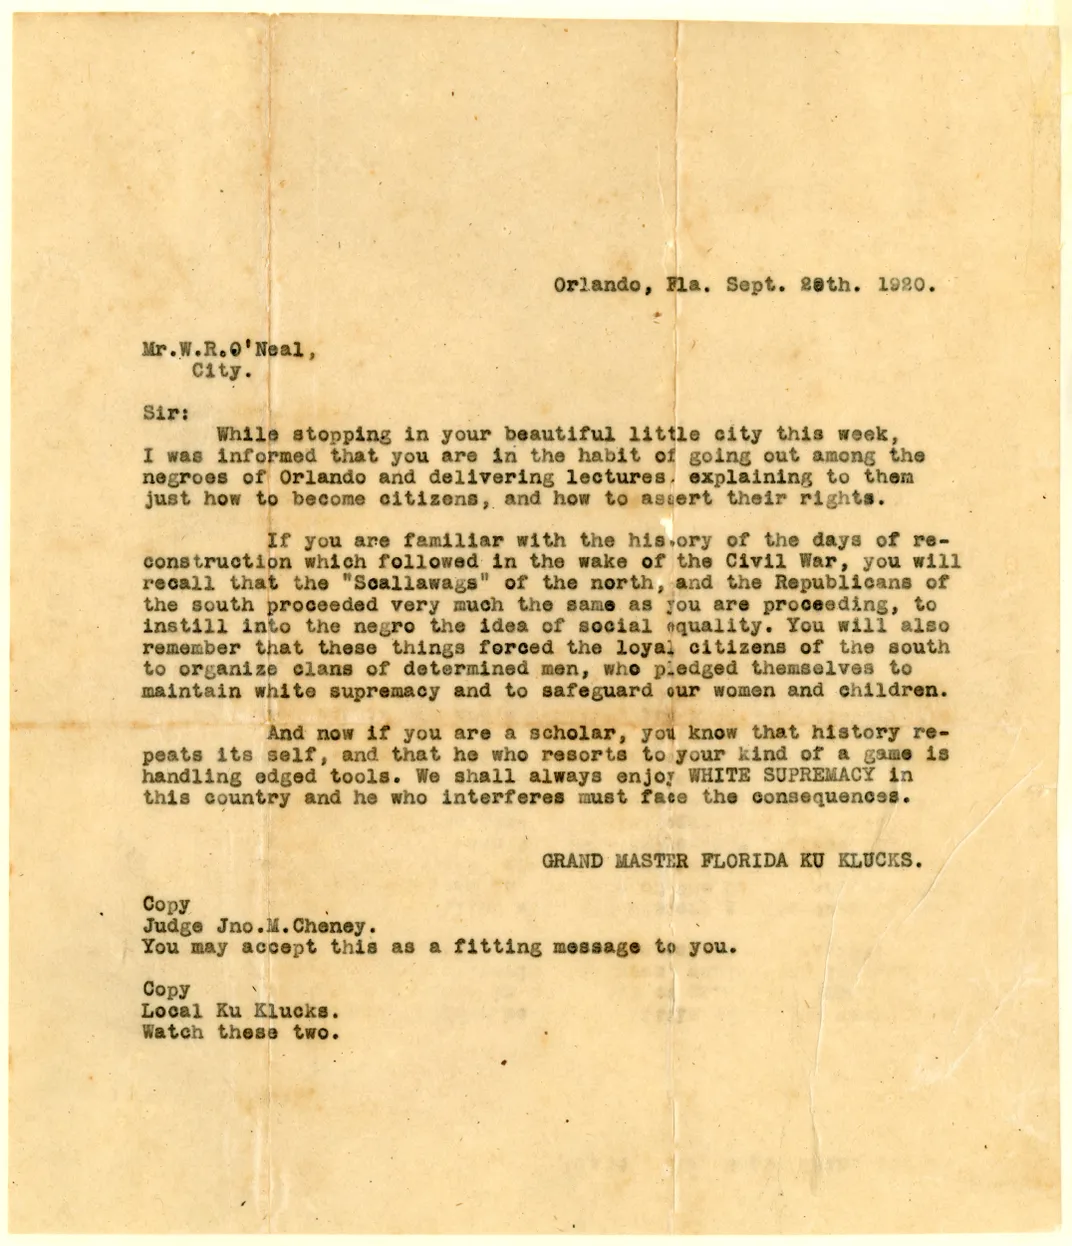 A letter sent to Judge John Cheney ahead of the 1920 election